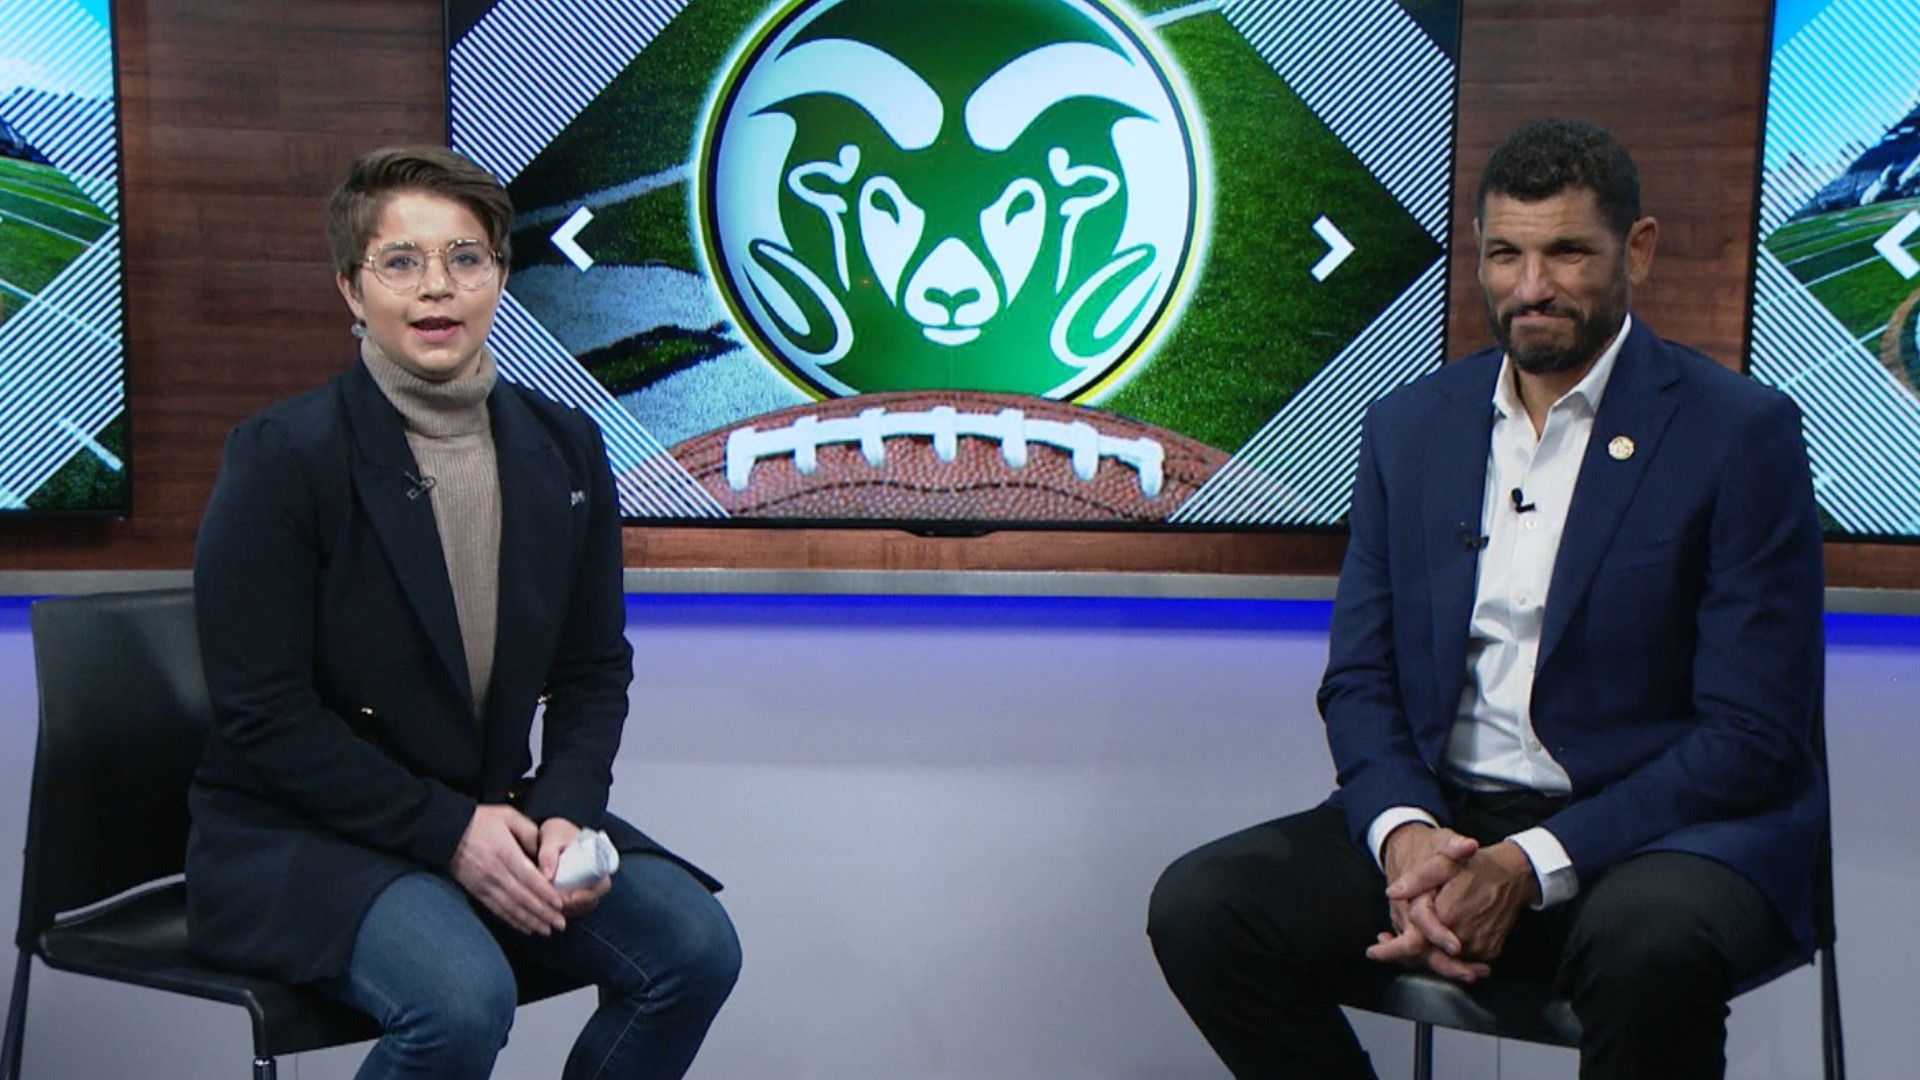 Colorado State has the No. 1 recruiting class in the Mountain West according to some outlets. Norvell discusses his class and the renewed rivalry with CU.